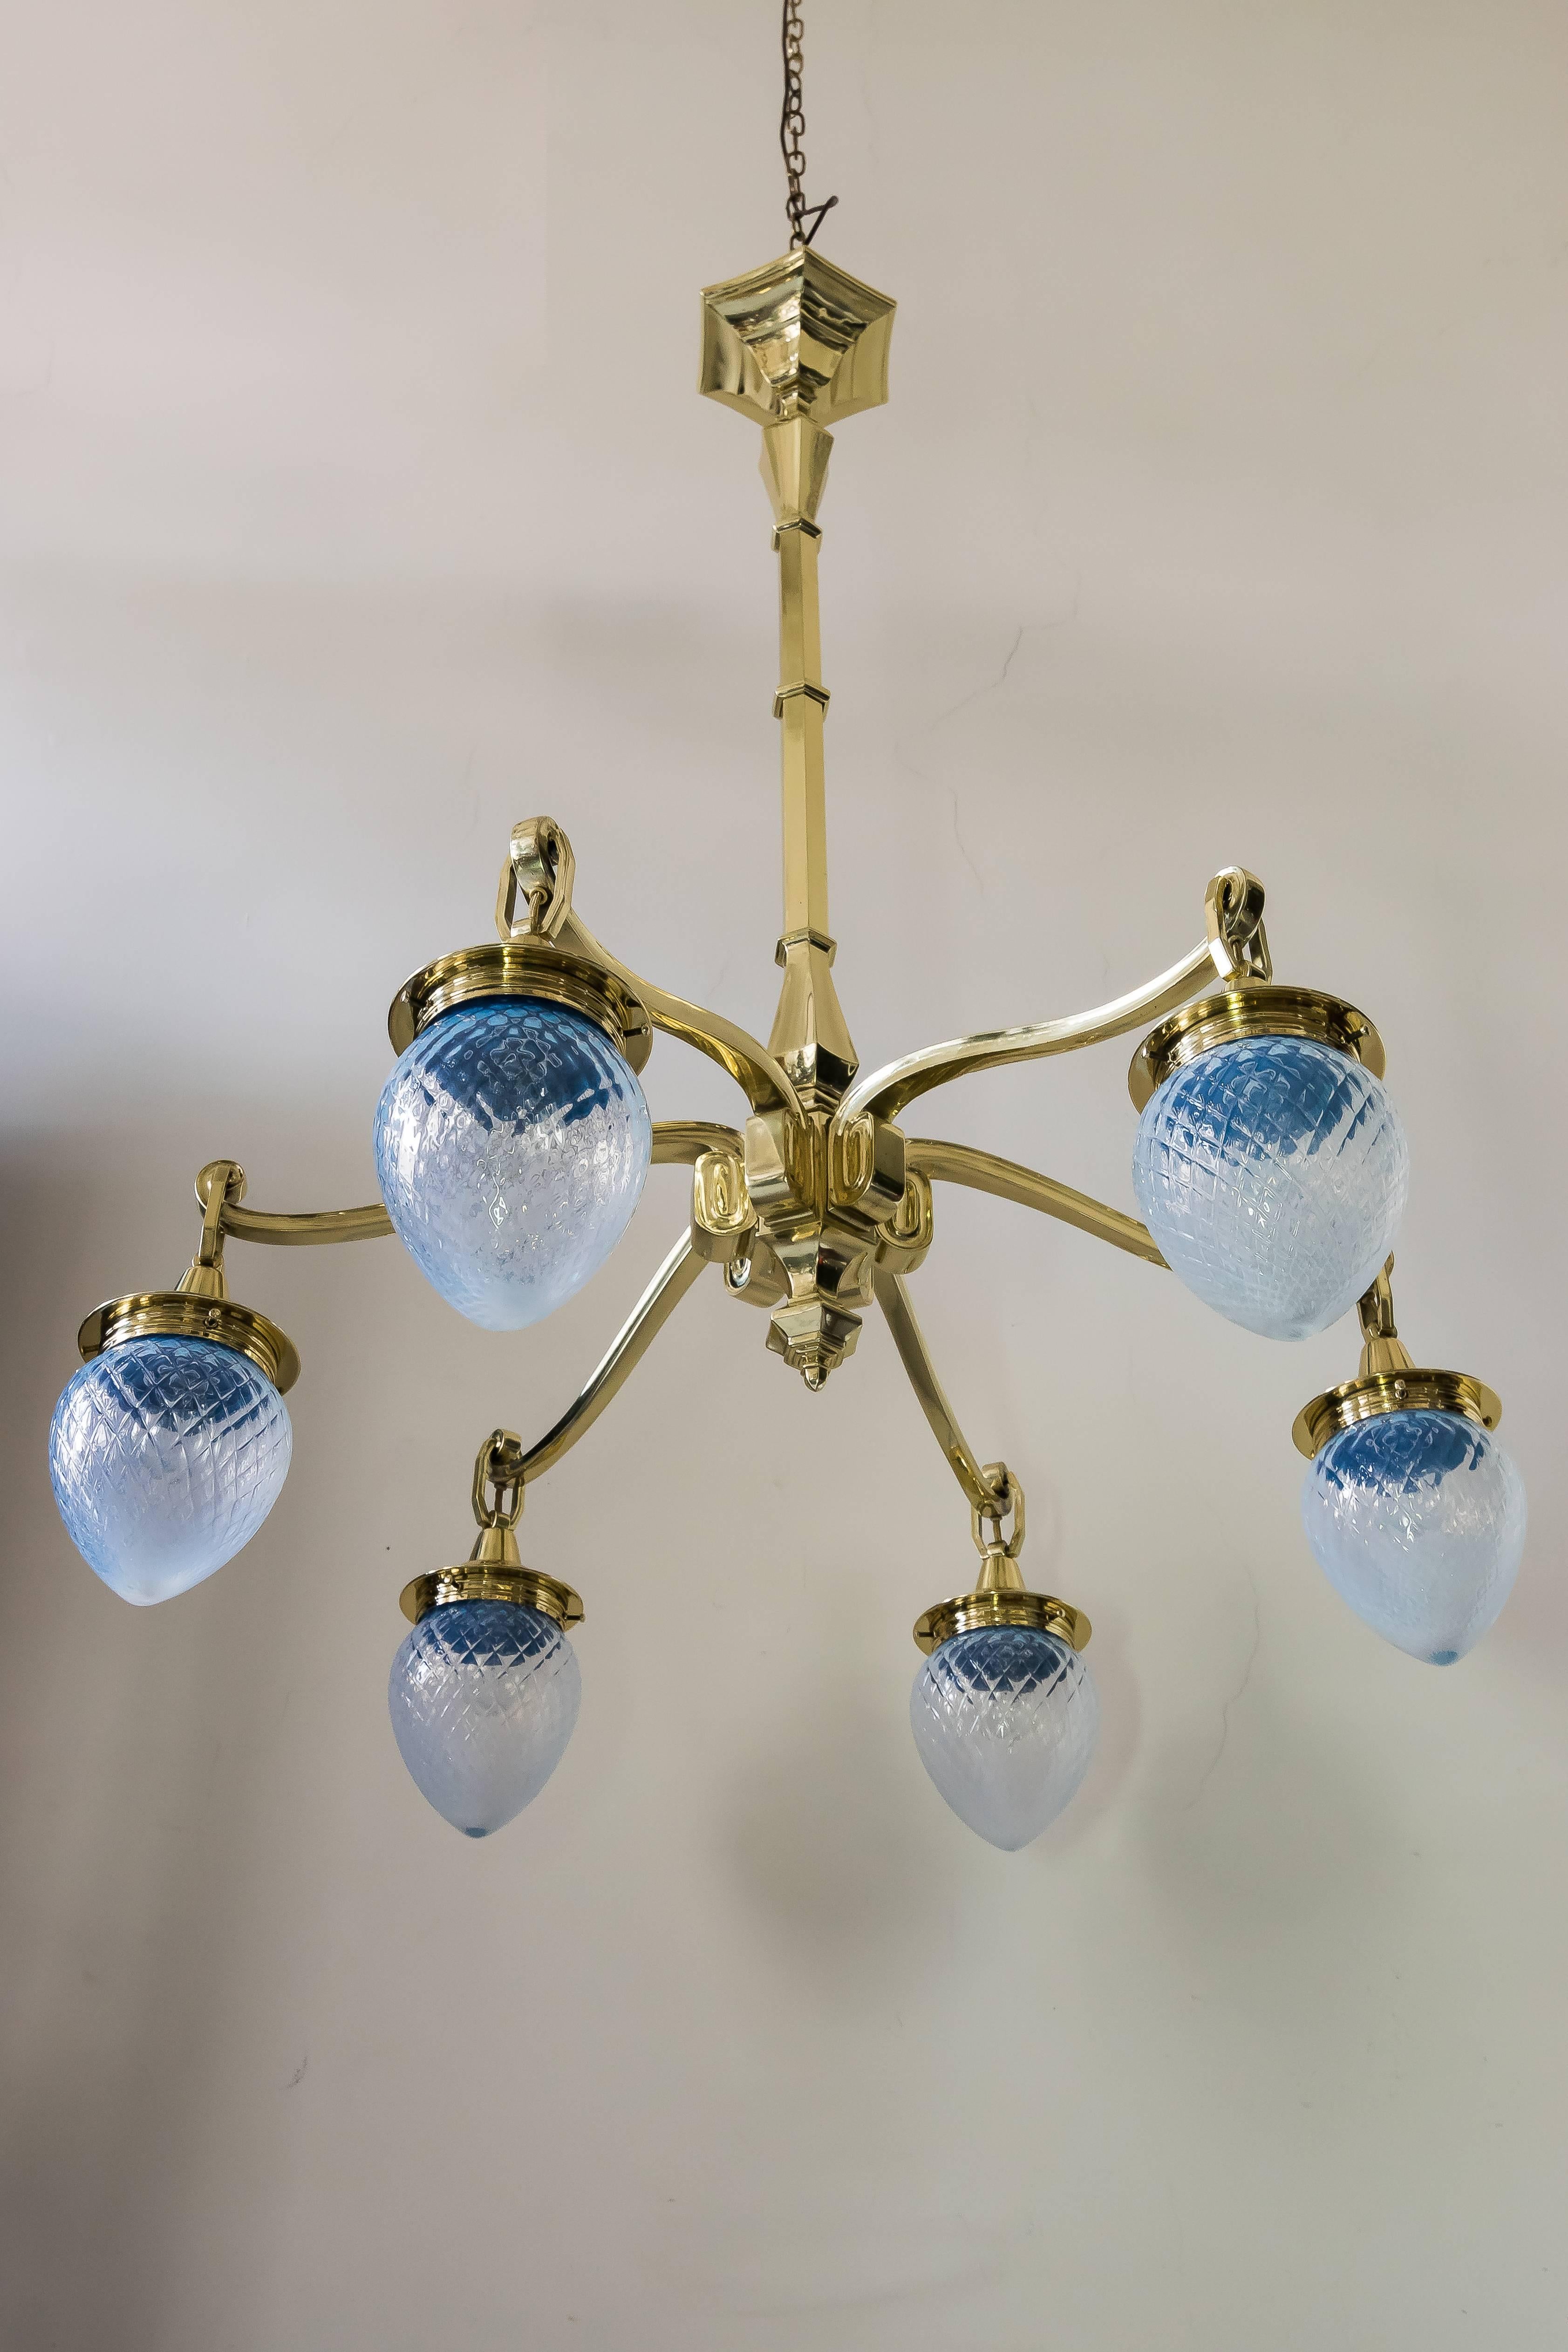 Huge Art Deco chandelier with opaline glass shades circa 1920s
Polished and stove enamelled.